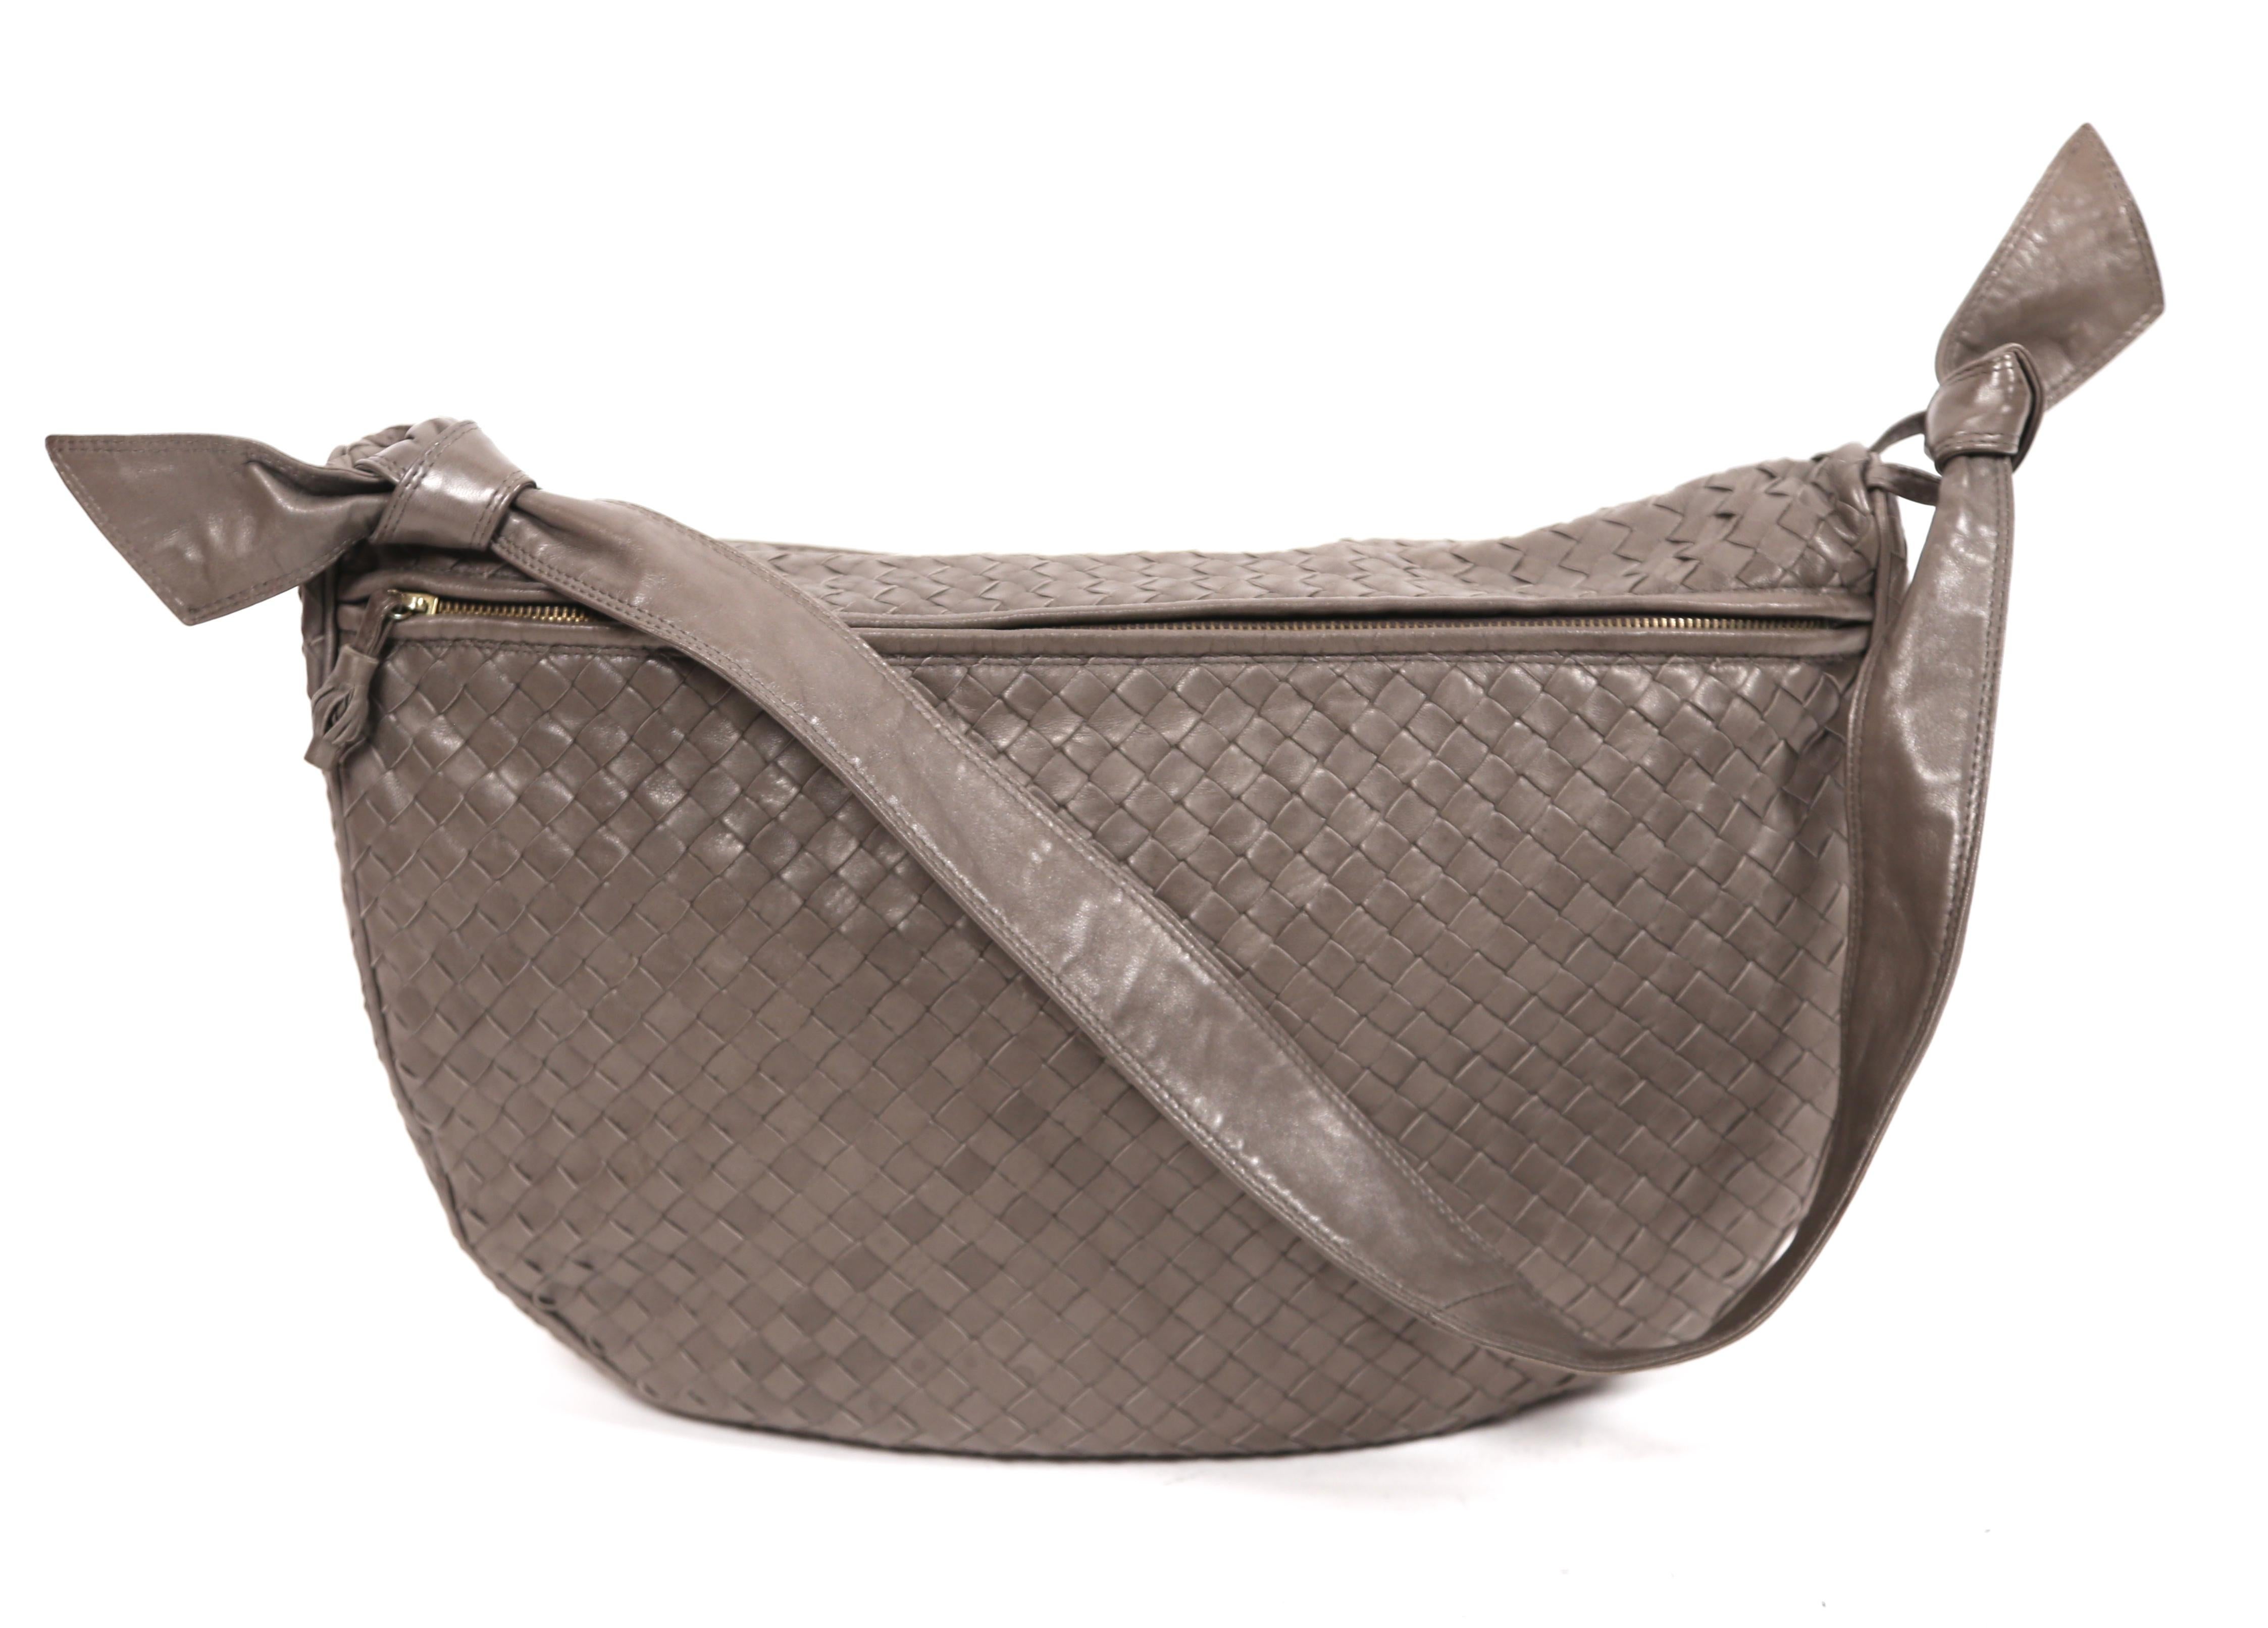 Elephant-Grey, woven leather bag from Bottega Veneta dating to the late 1980's. Bag measures approximately 16